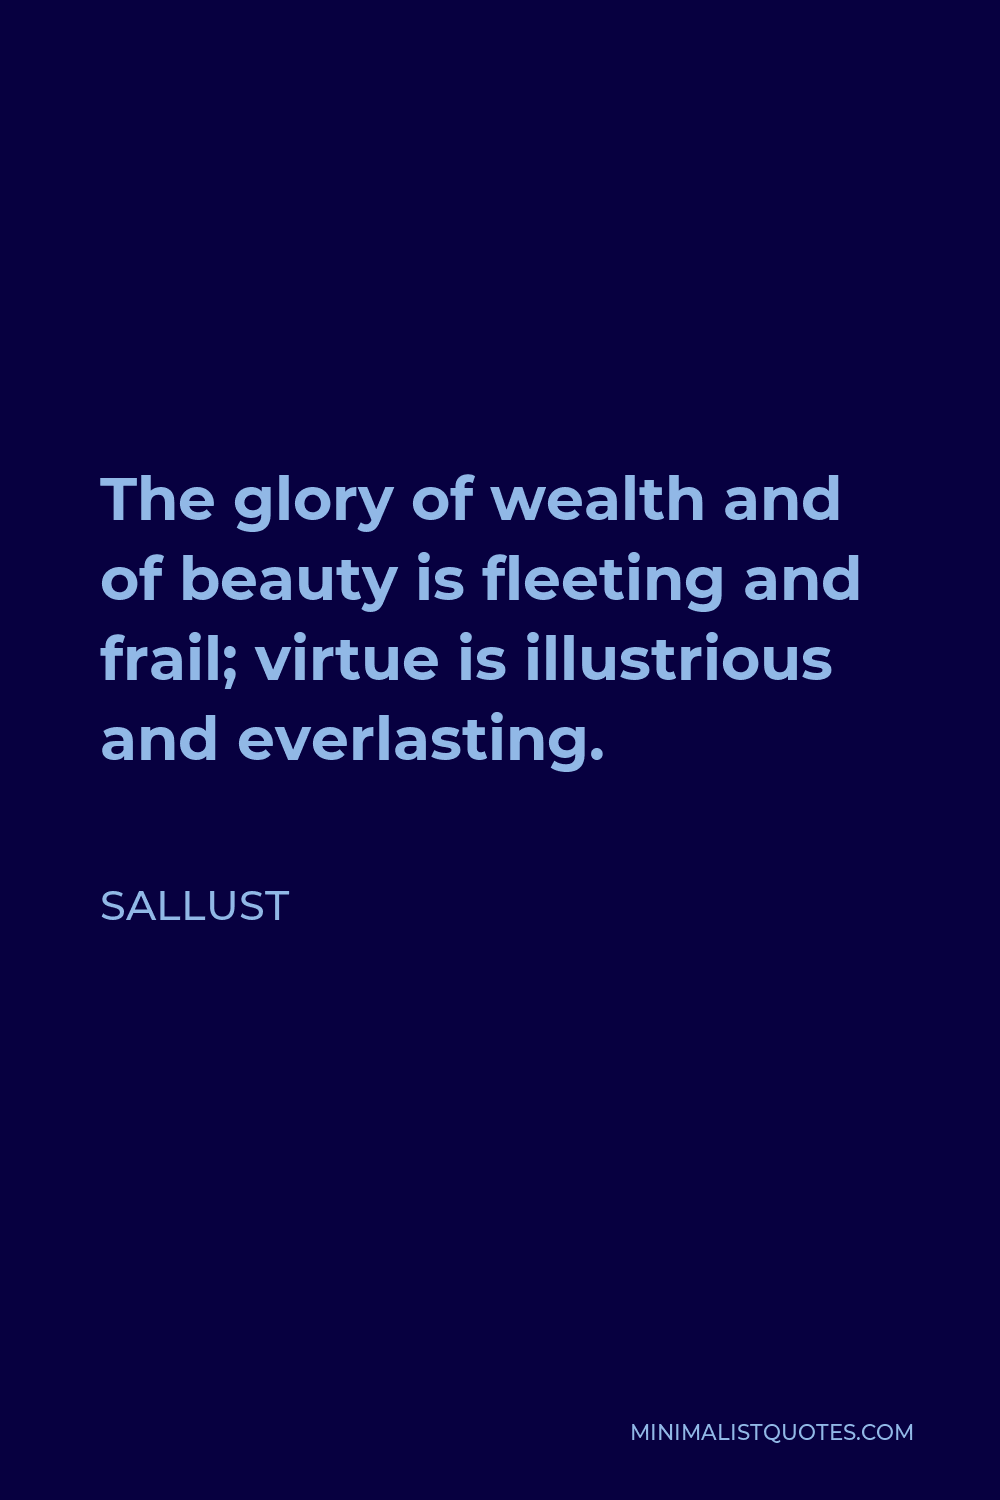 Sallust Quote - The glory of wealth and of beauty is fleeting and frail; virtue is illustrious and everlasting.